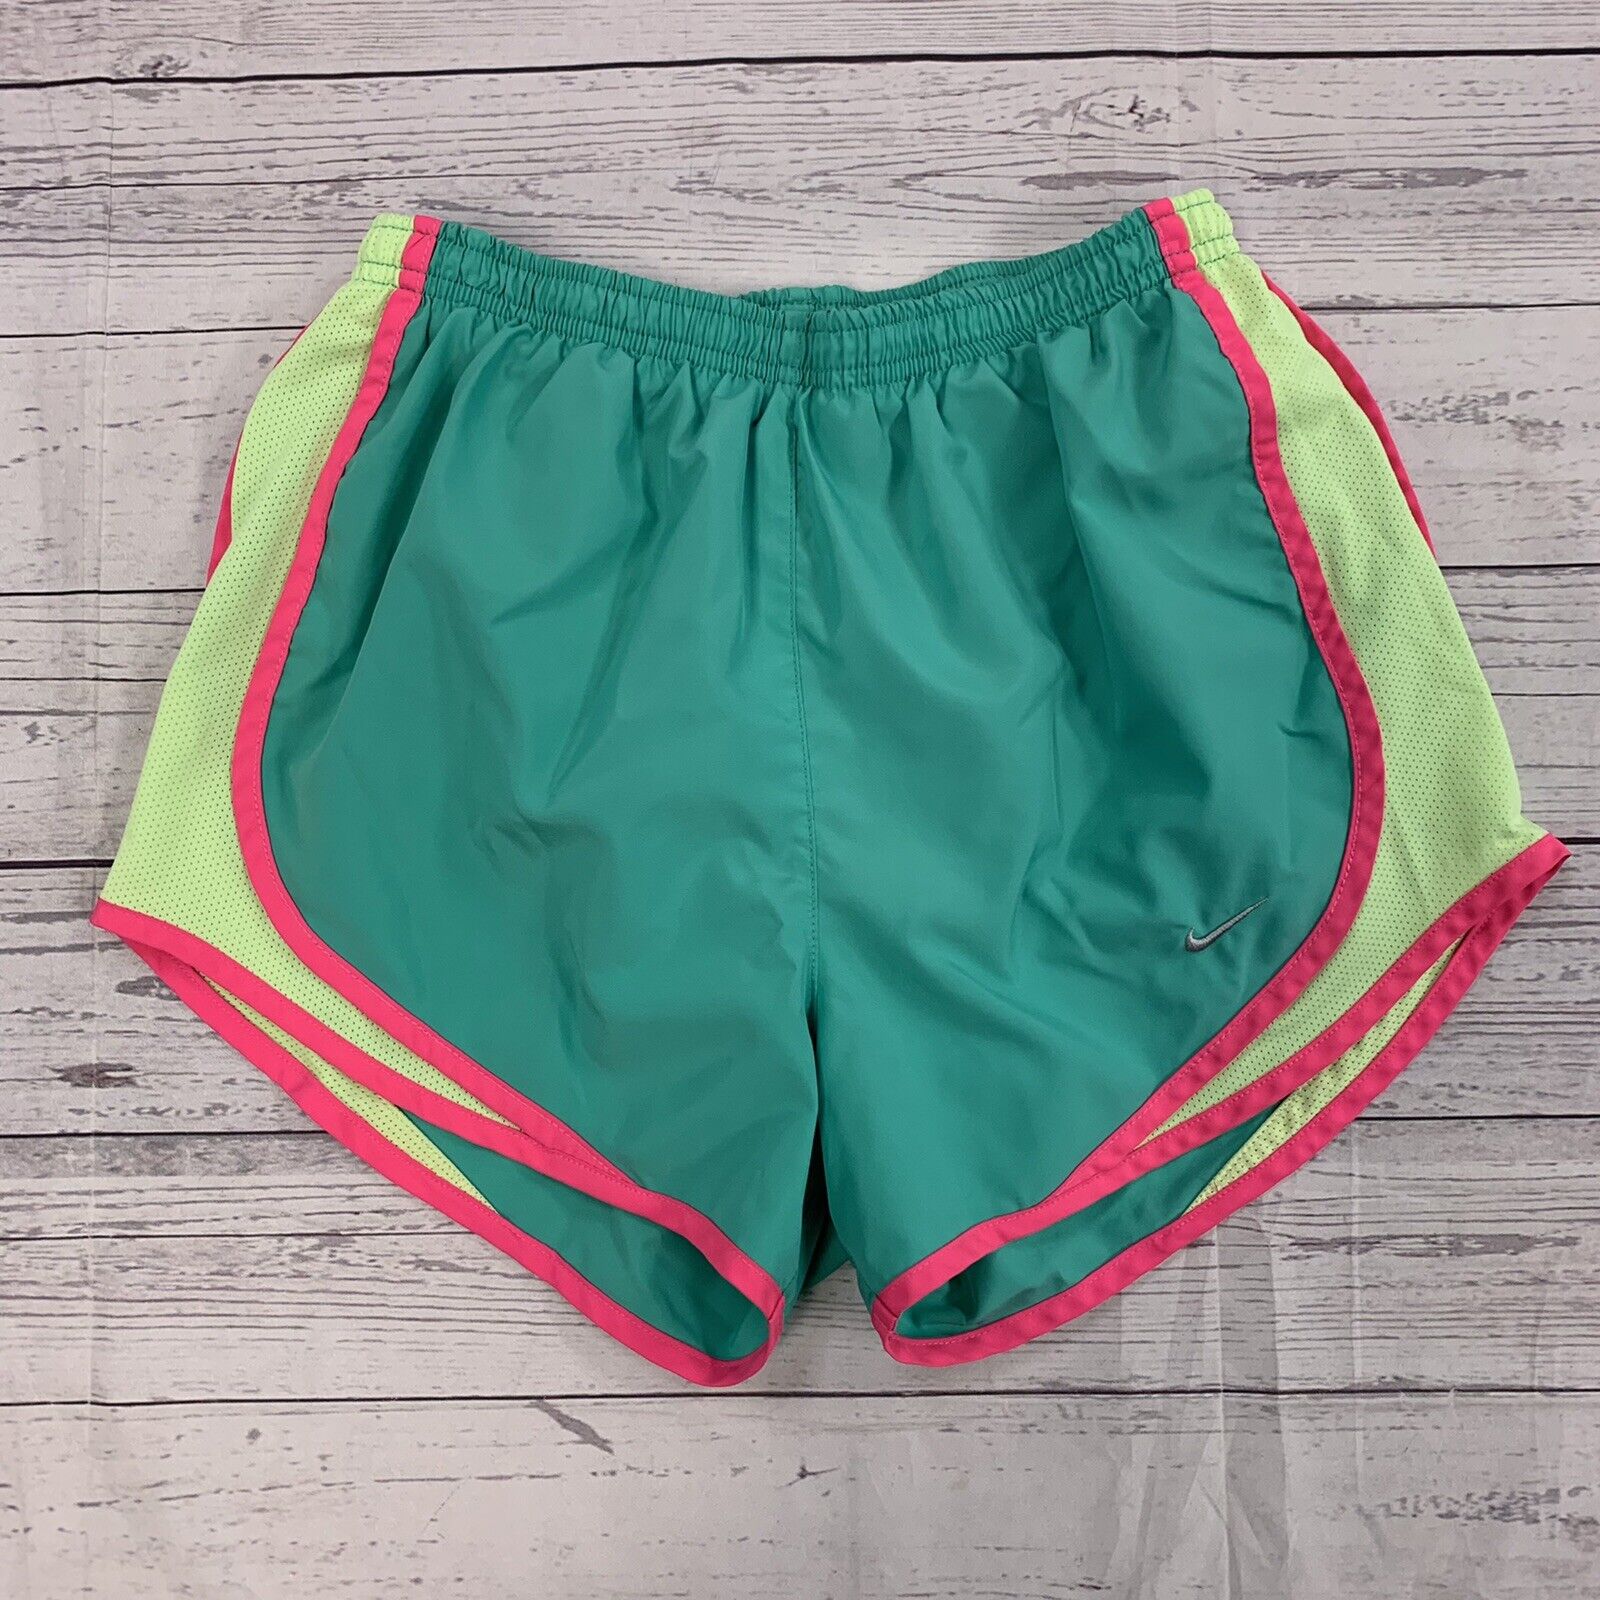 Nike Dri Fit Womens green/pink Athletic Shorts size small - beyond